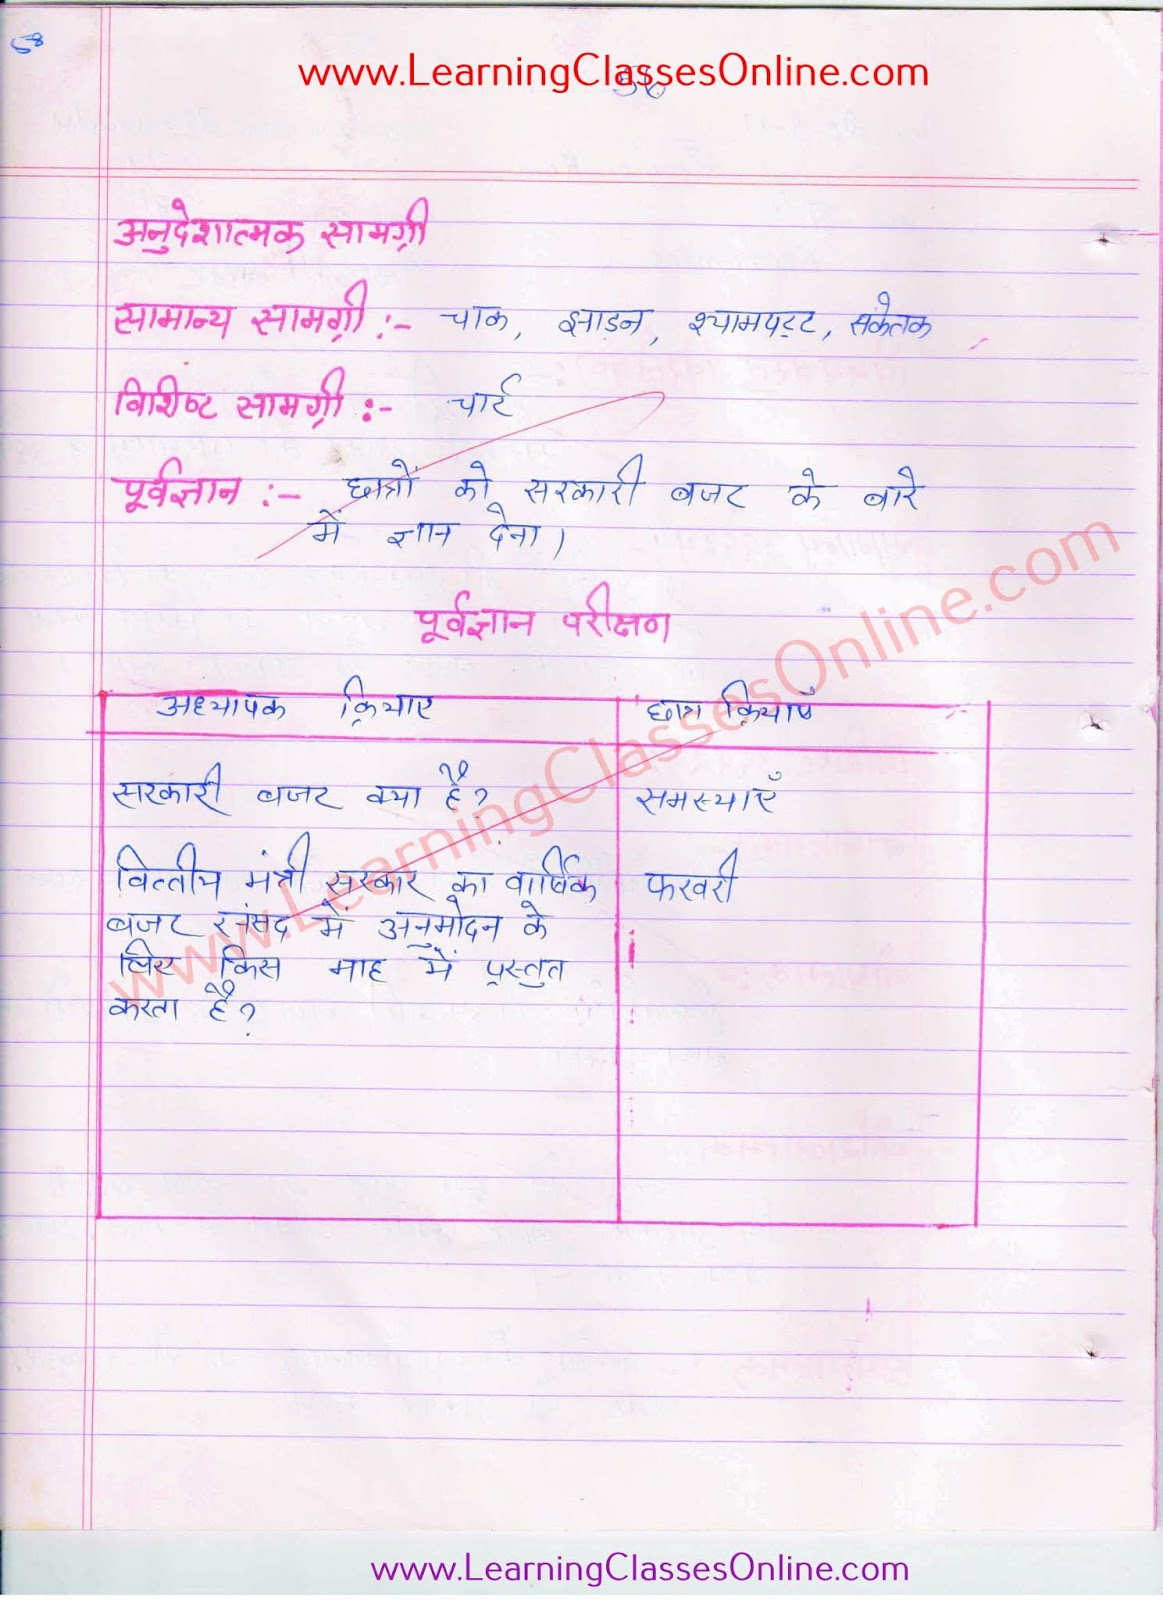 clas 10th budget lesson plan in hindi